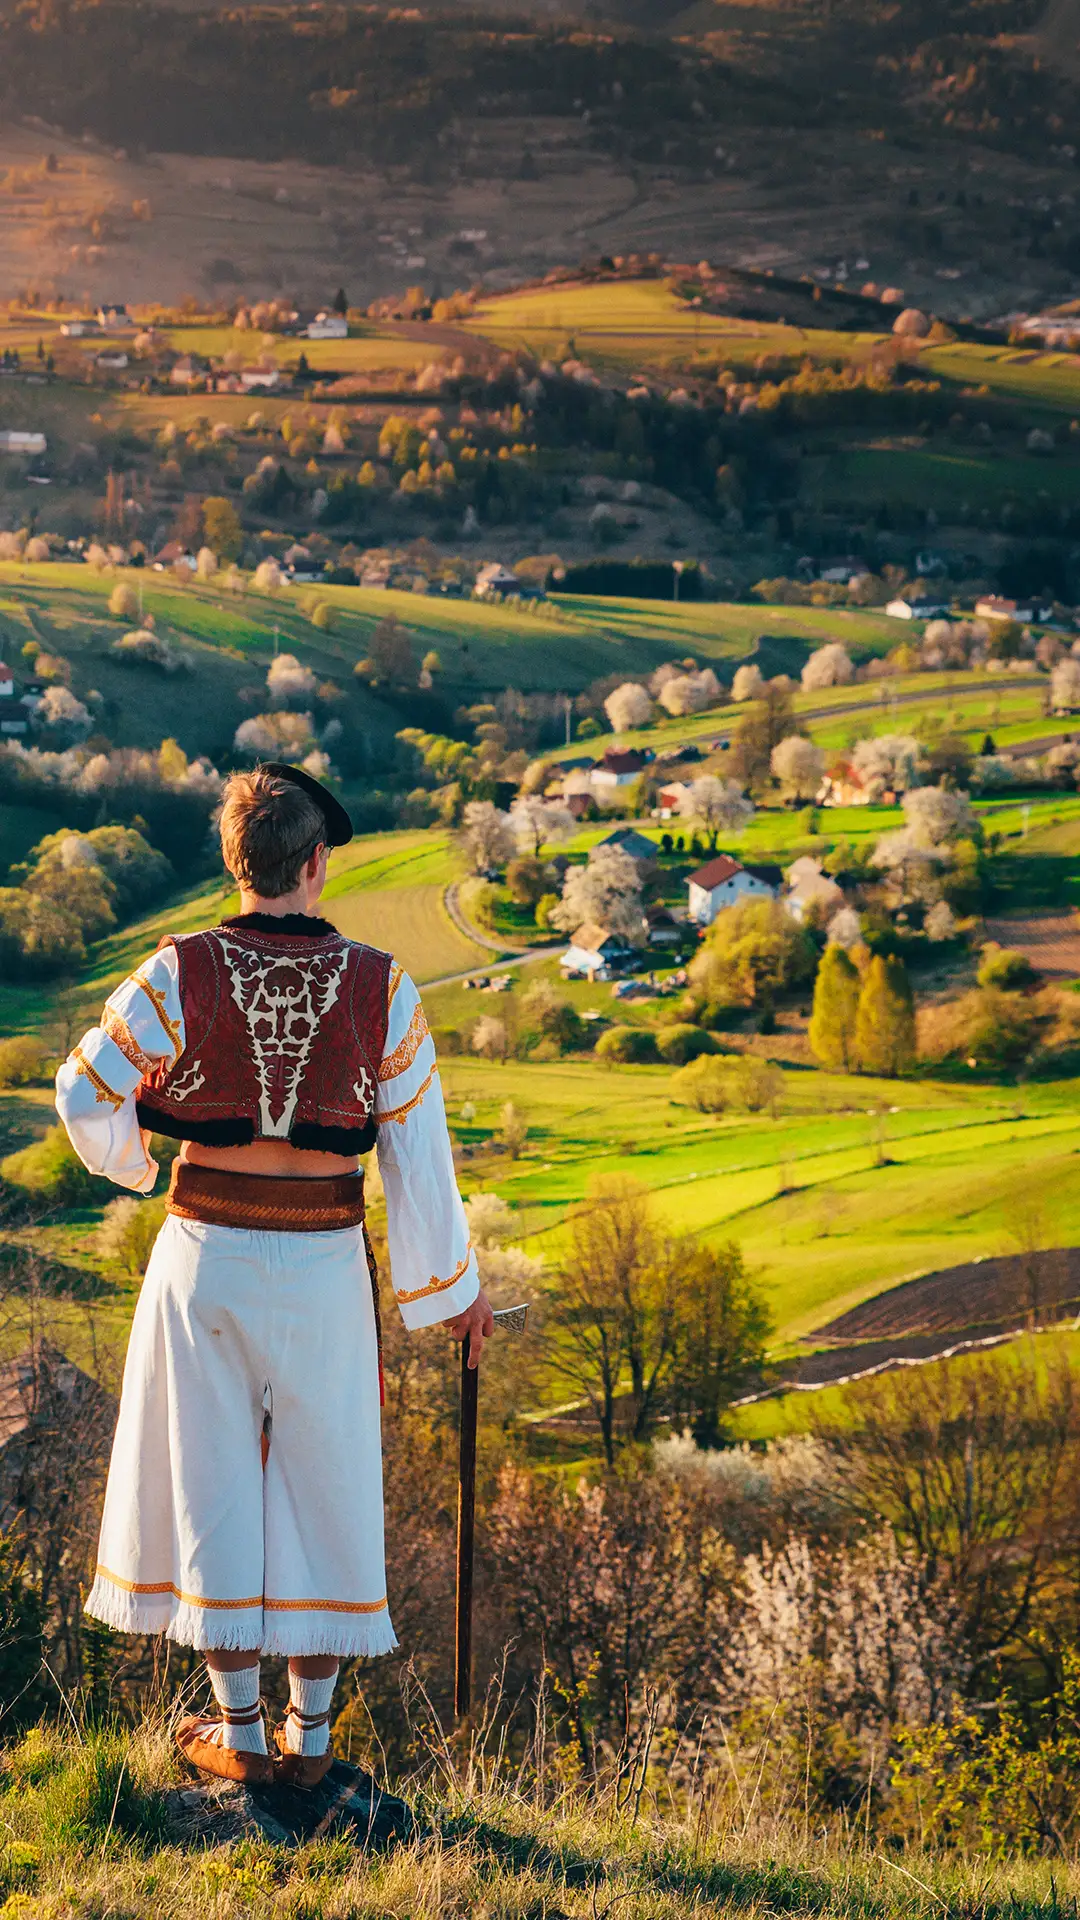 A young man in a Slovak folk costume looks at the spring landscape in the village of Hrinova in Slovakia. Rising sun and spring flowering trees in the background.